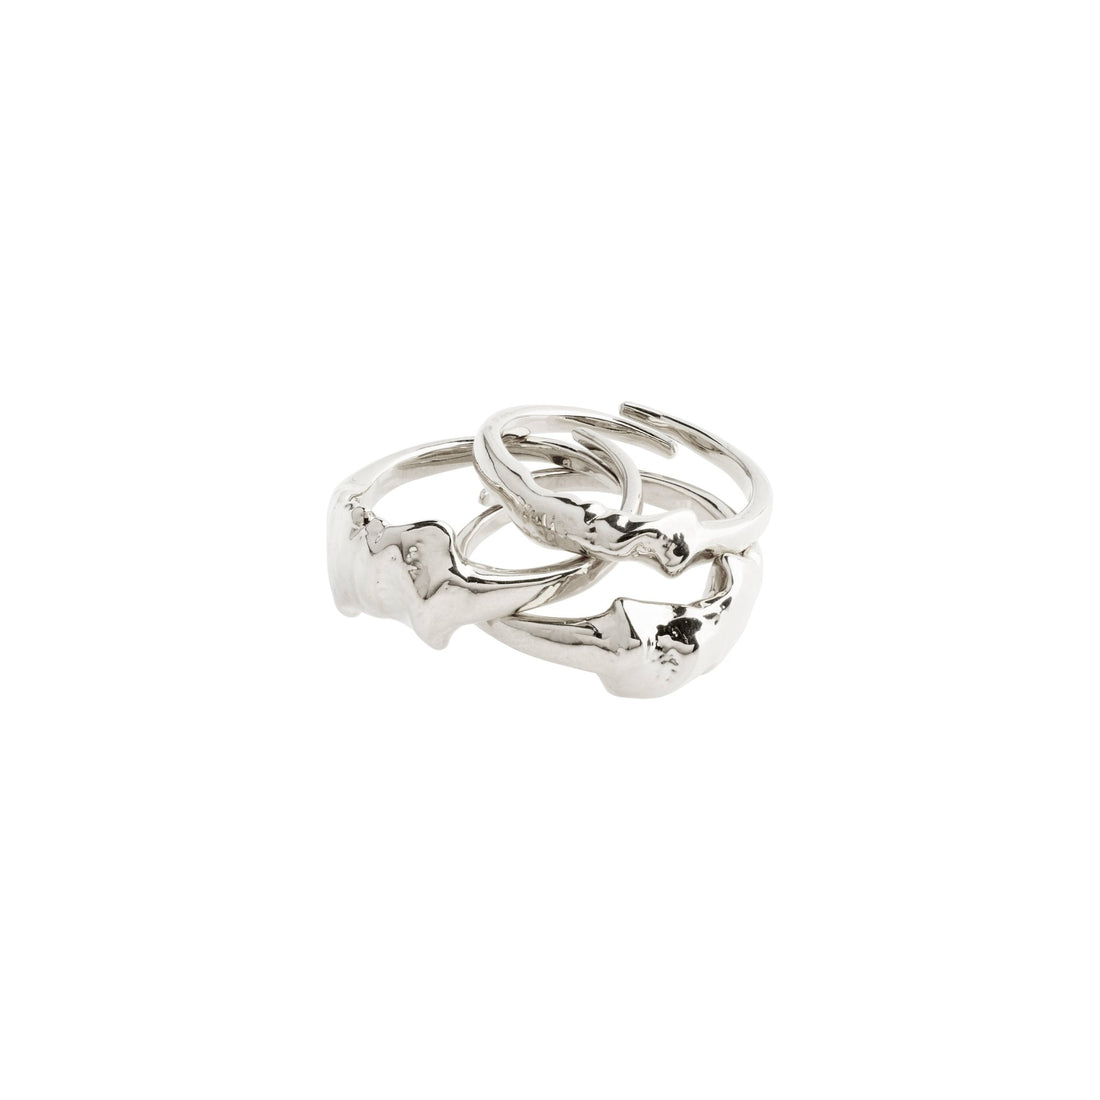 ANNE recycled ring 3-in-1 set - PILGRIM